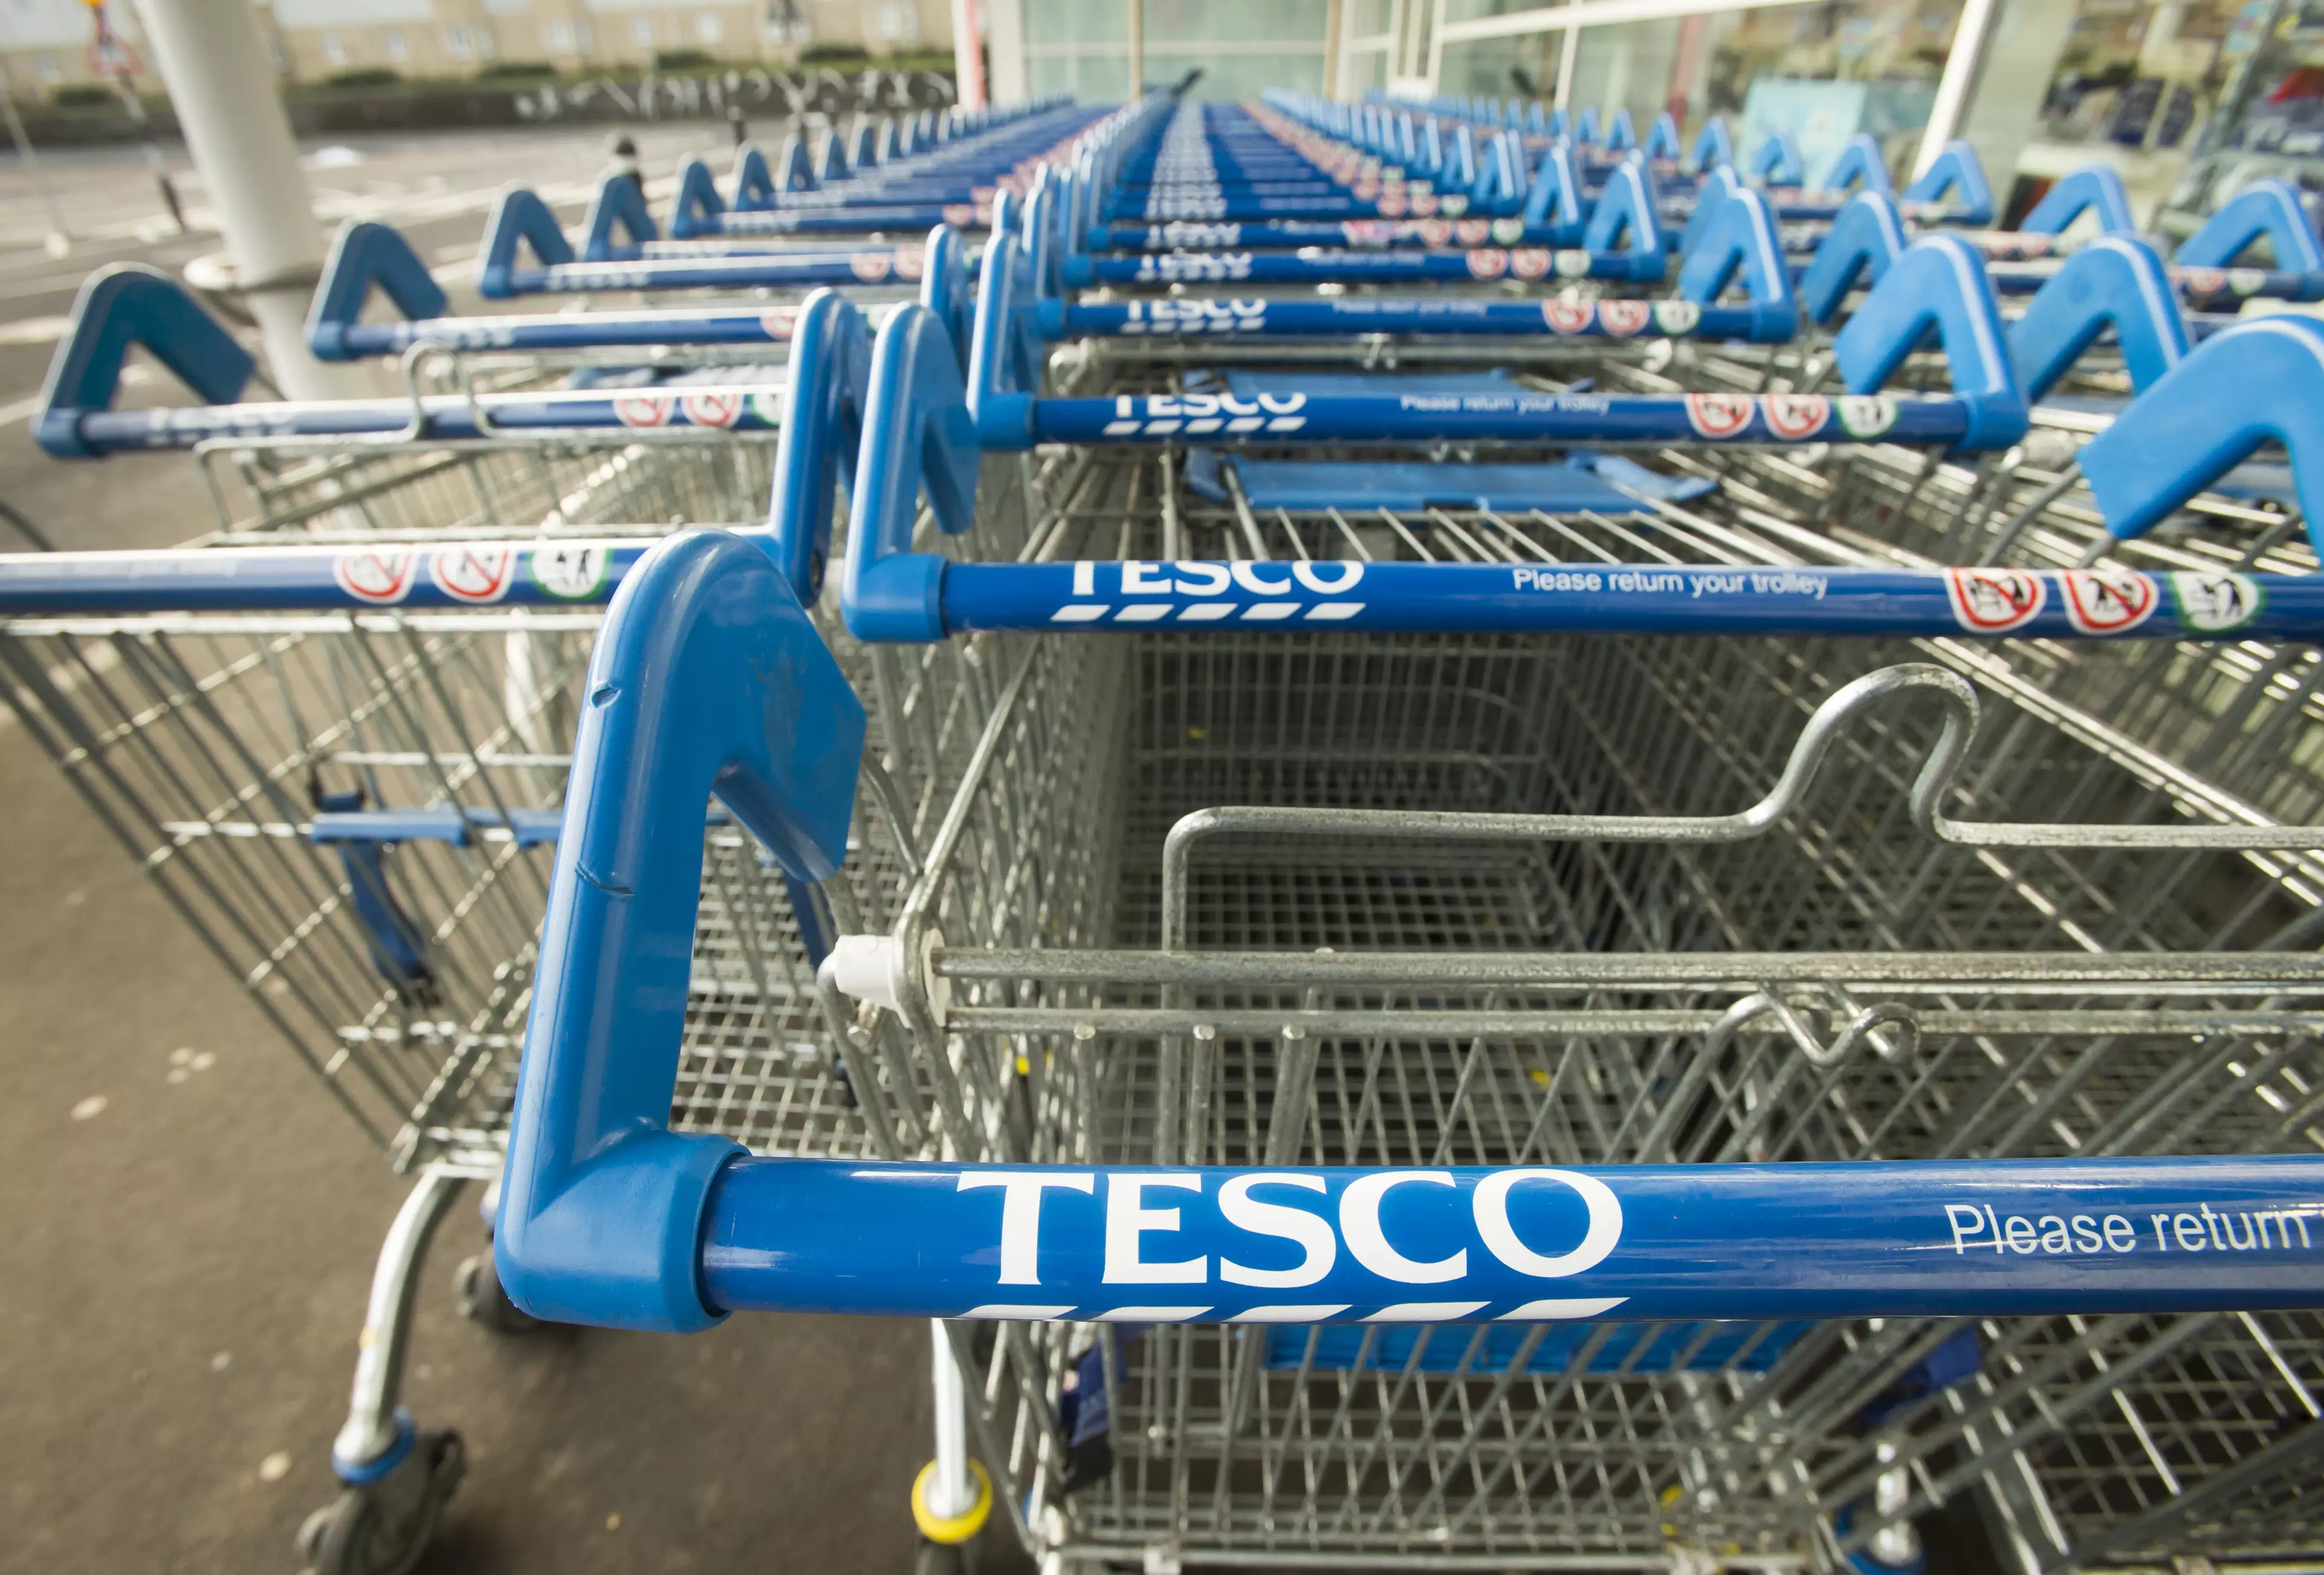 One customer complained to the supermarket giant about the trolleys.